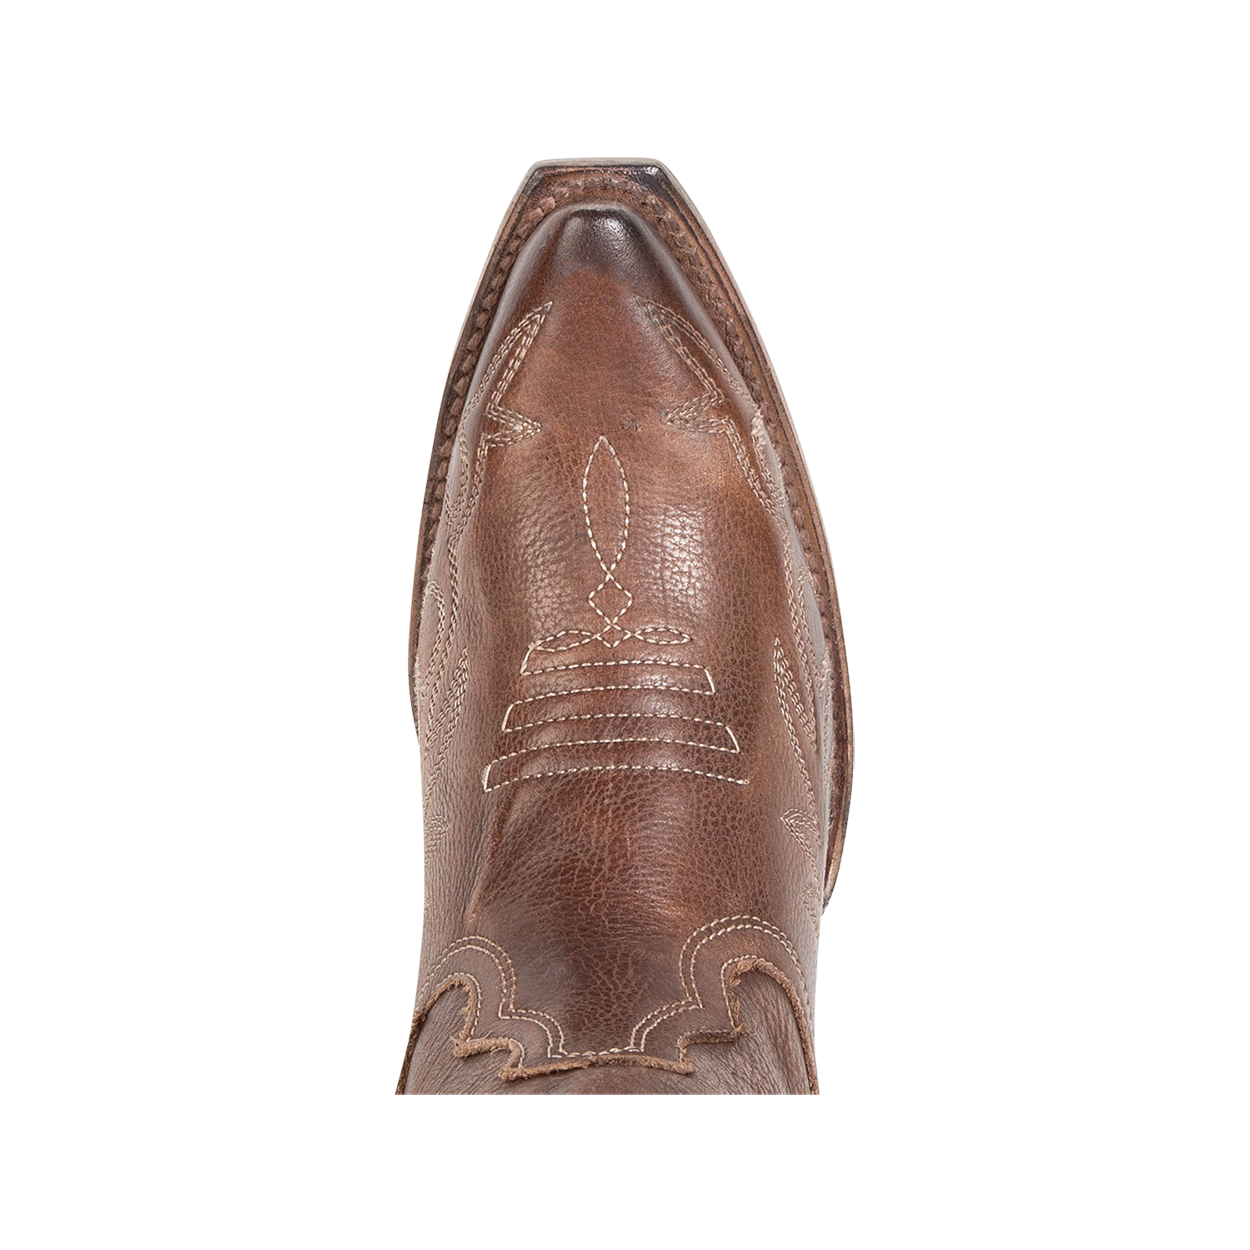 Top view showing snip toe with stitch detailing on FREEBIRD women's Wonder brown leather tall western boot